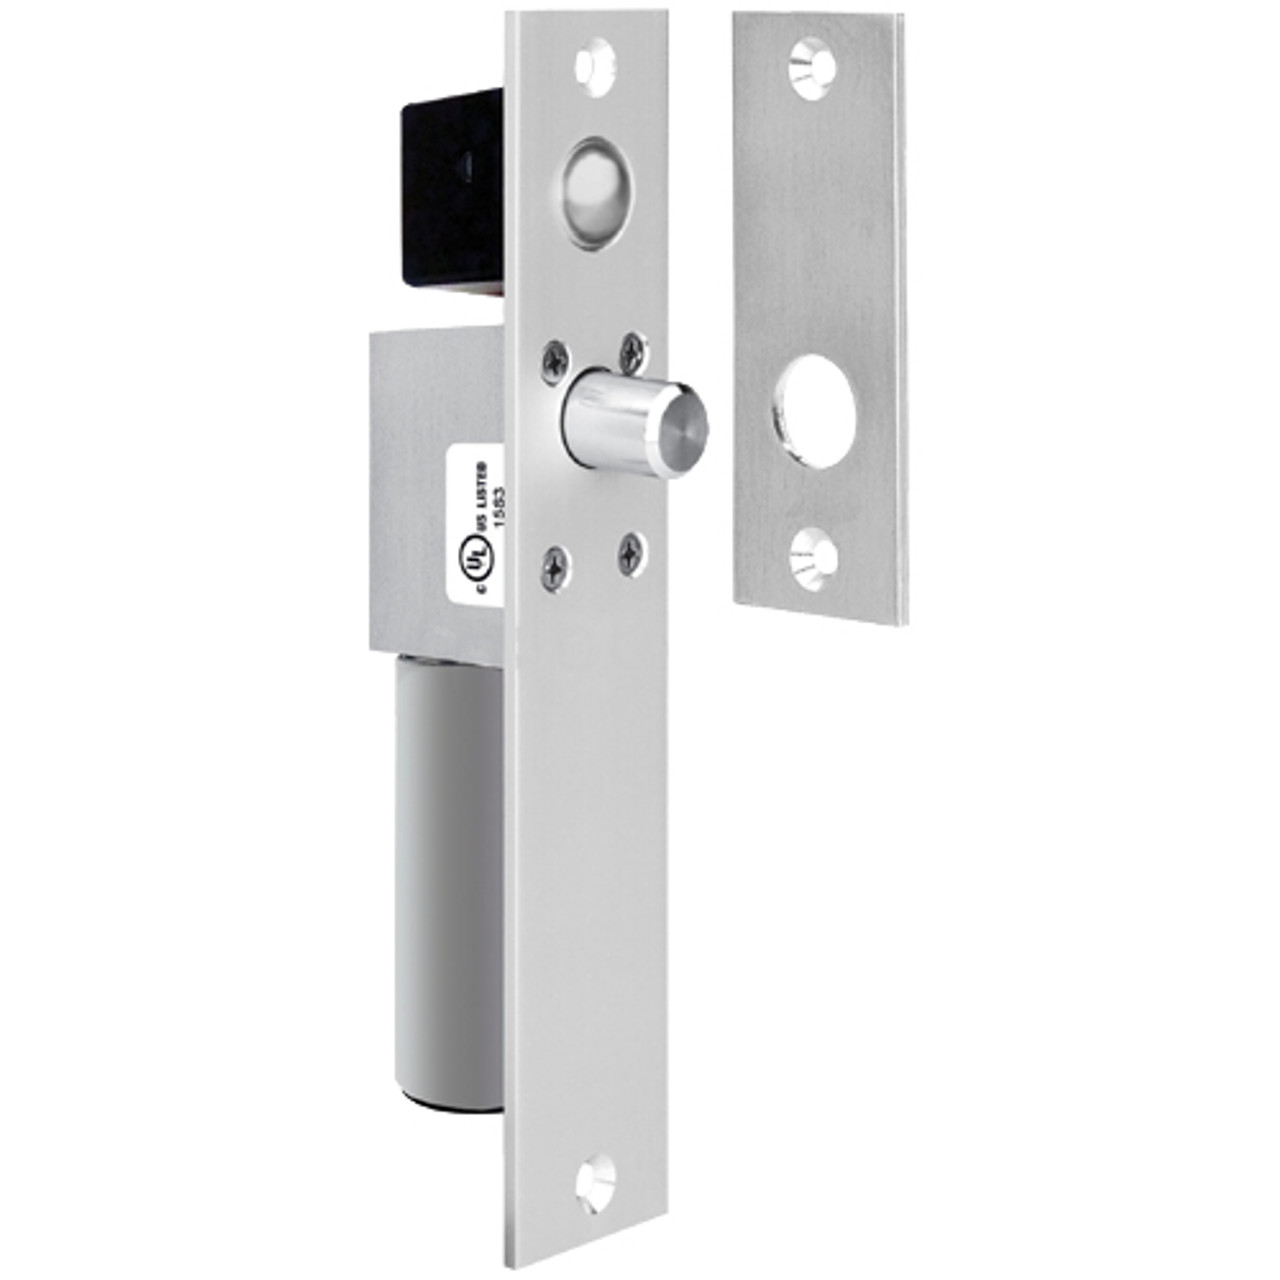 1091AIVD SDC FailSafe Spacesaver Mortise Bolt Lock with Door Position Sensor in Aluminum